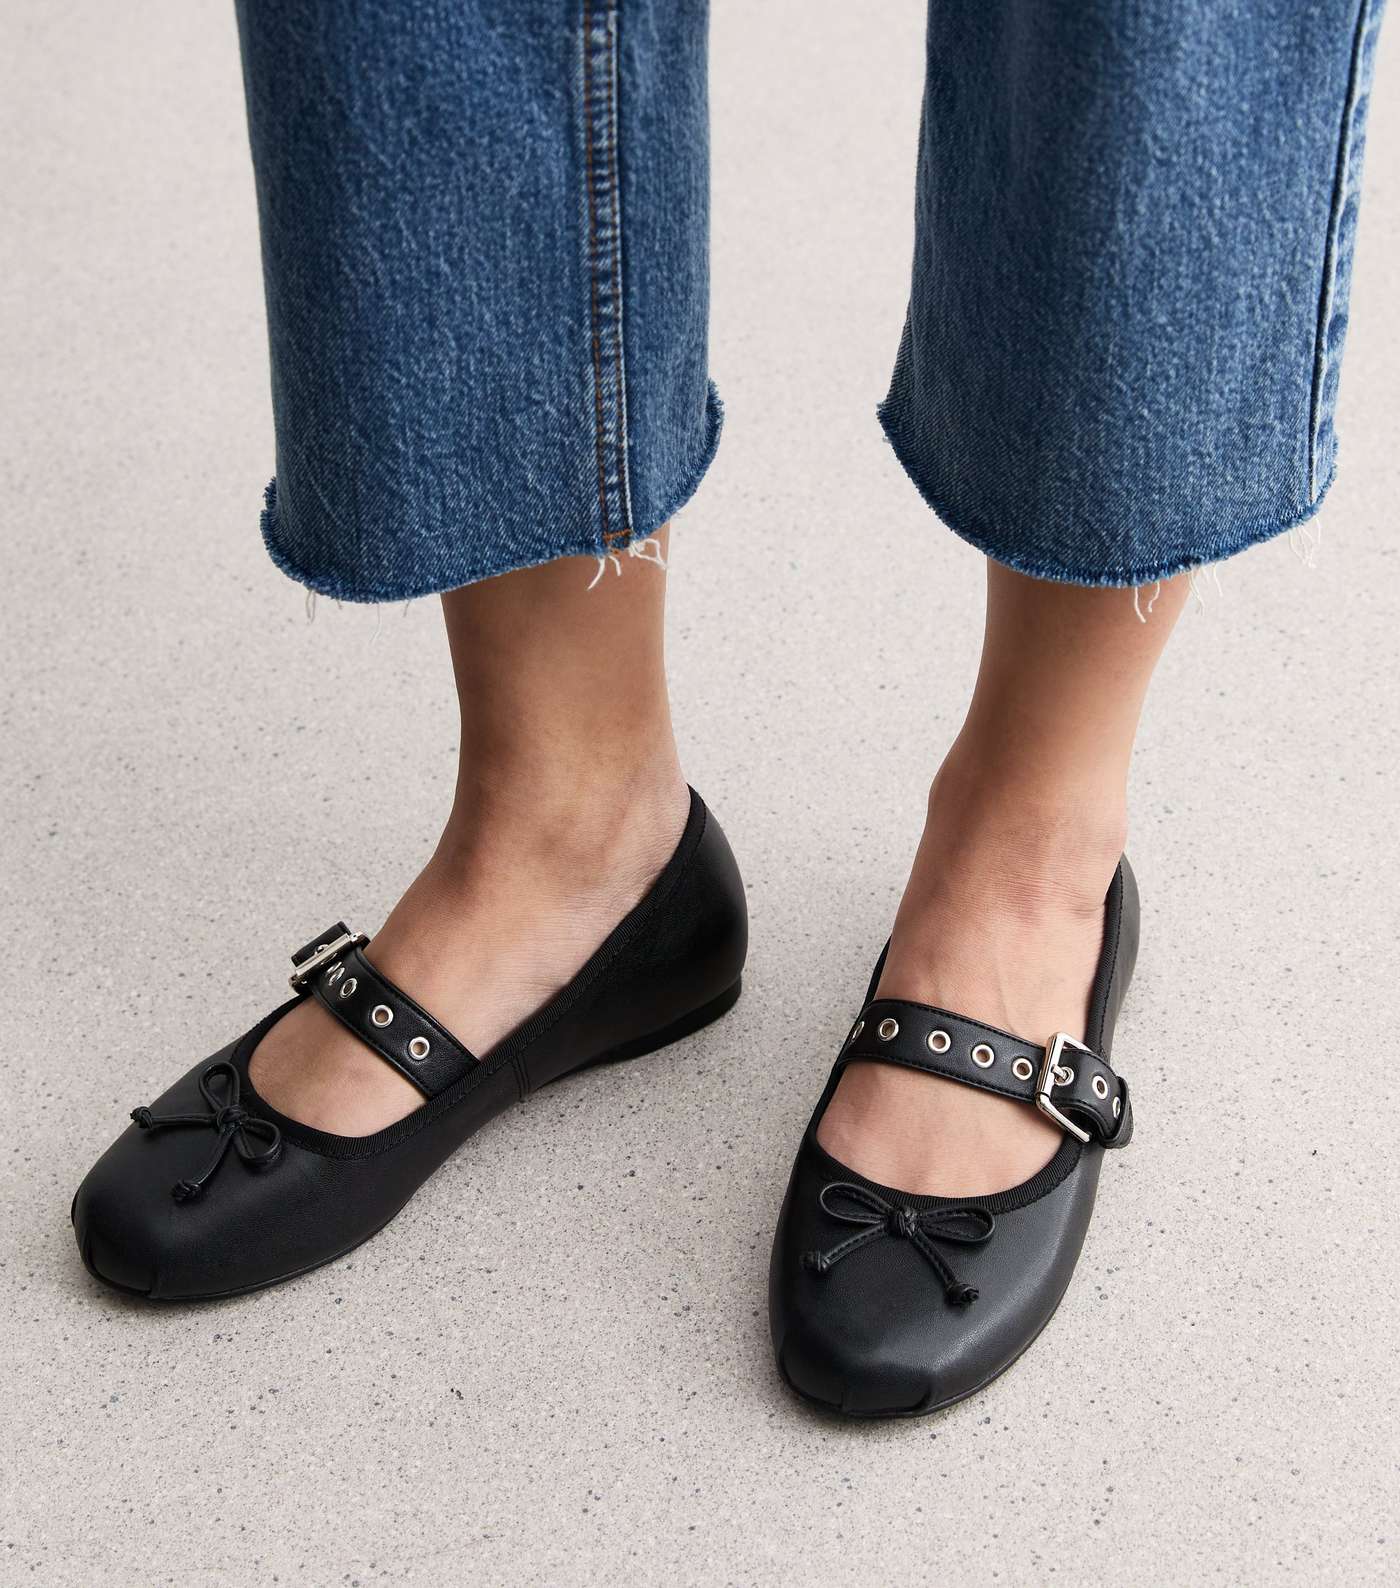 Black Leather-Look Strappy Ballerina Pumps